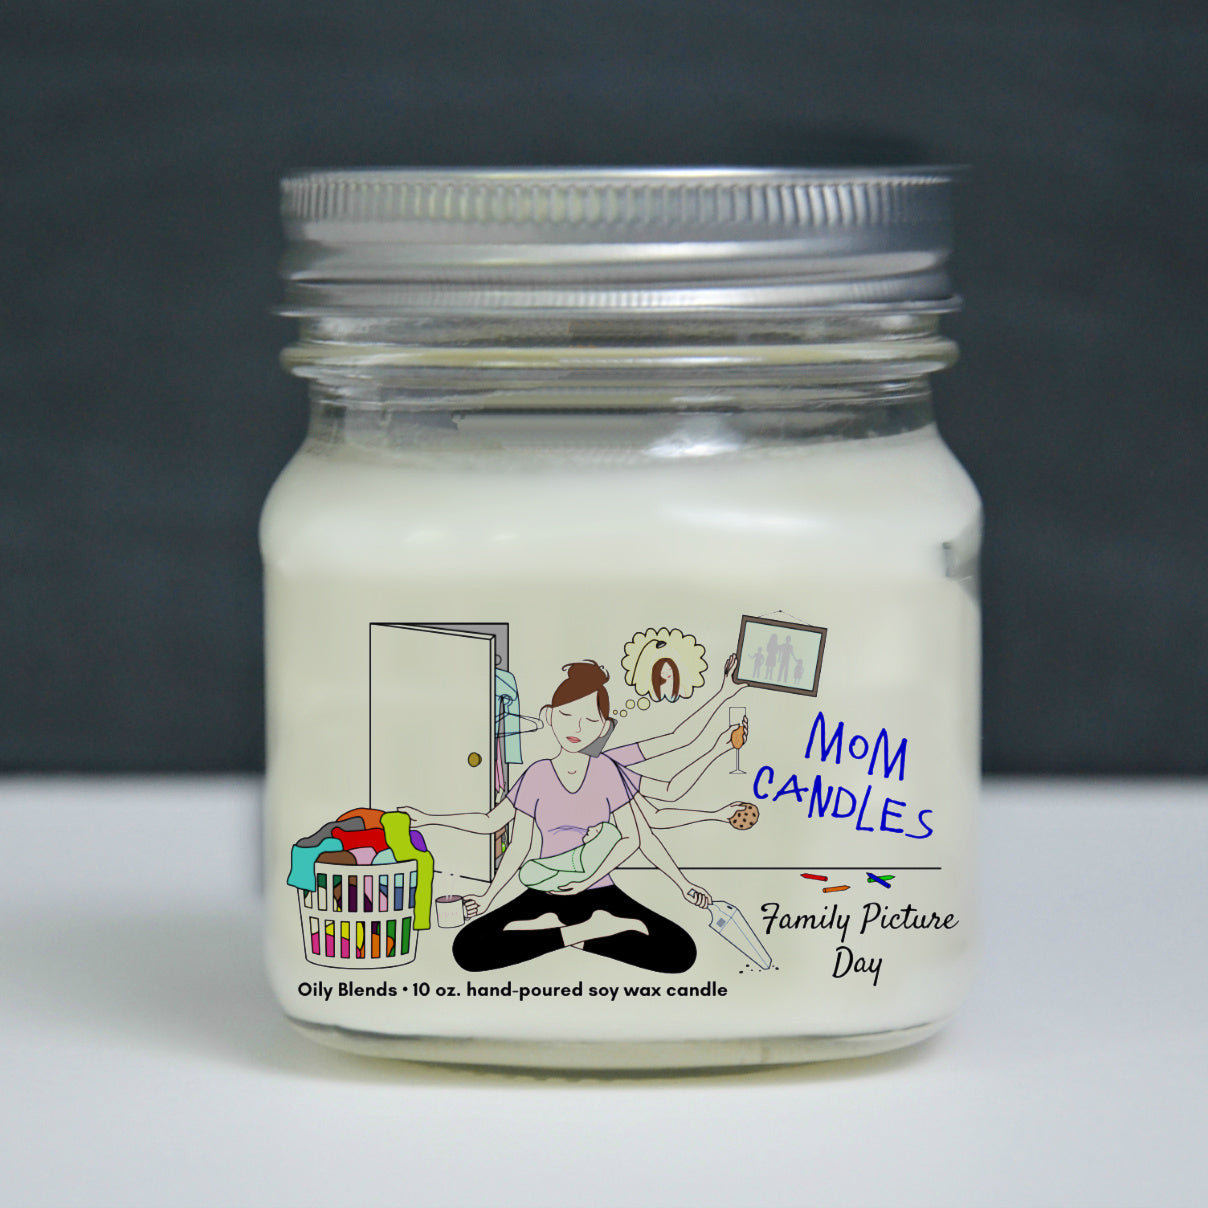 Mom Candles - 50 Hour Burn Time Soy Wax Candles